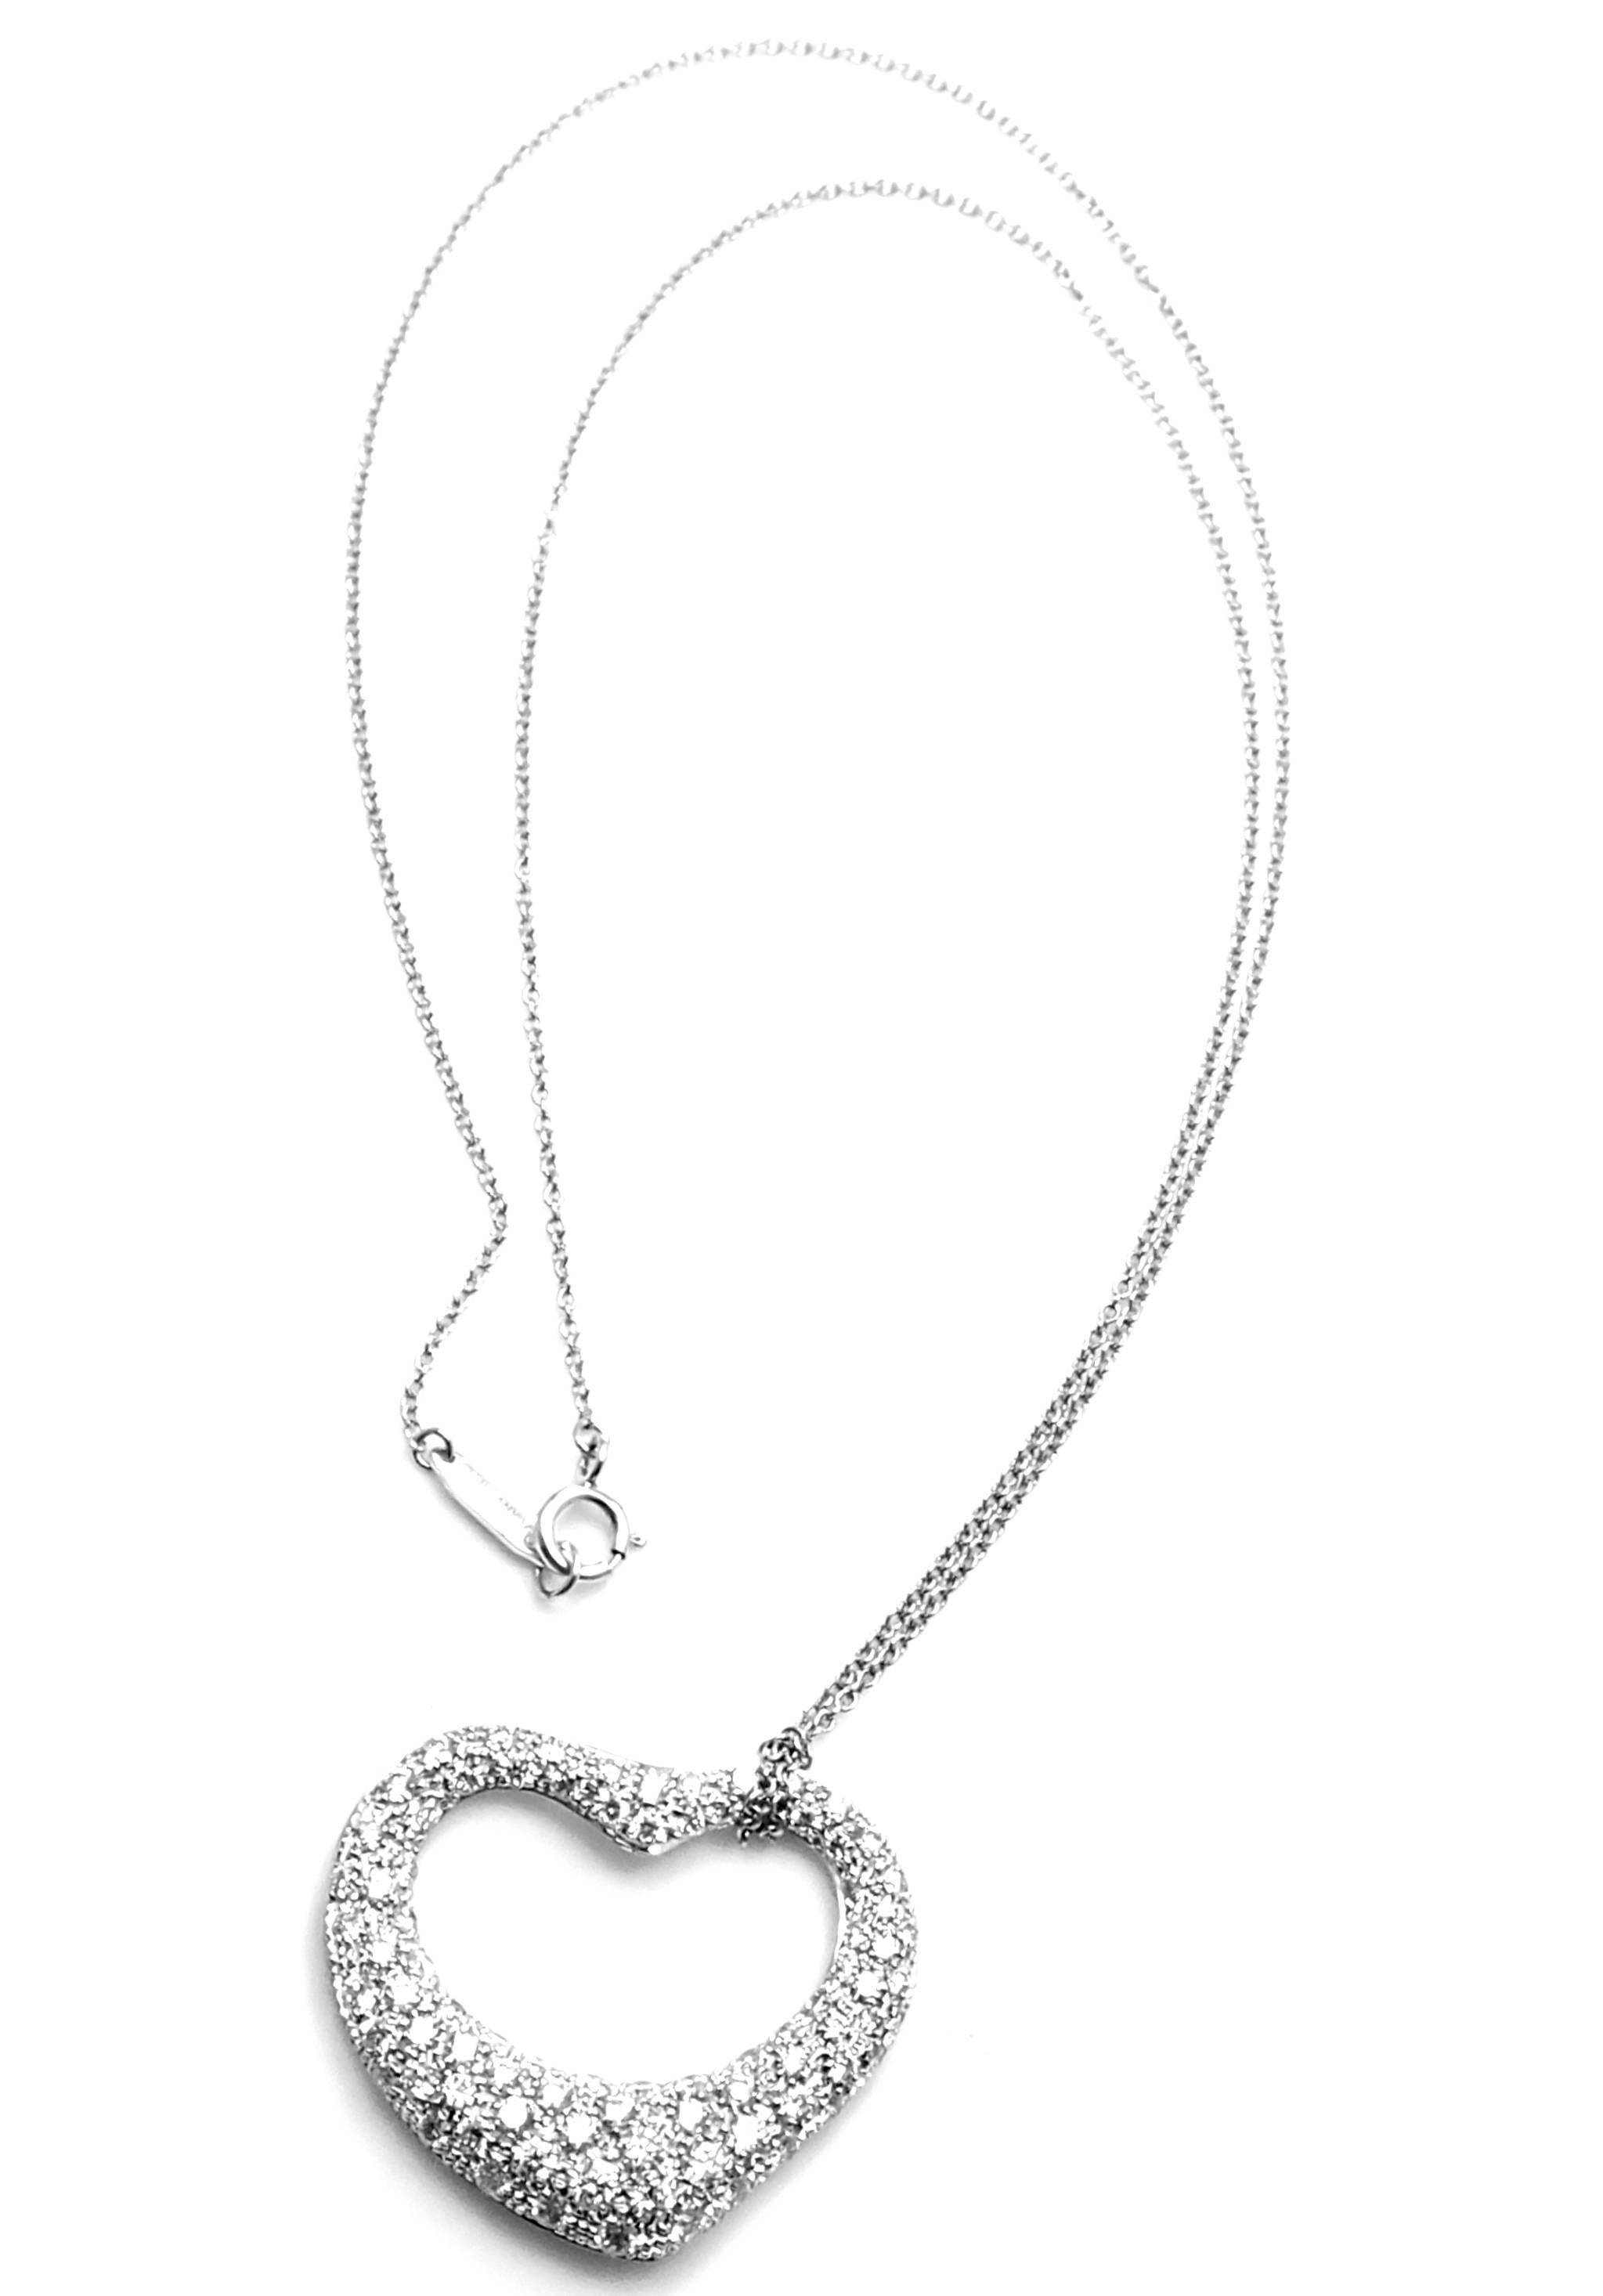 Platinum Diamond Open Heart Pendant Necklace by Elsa Peretti for Tiffany & Co.
With Round brilliant cut diamonds VS1 clarity, G color total weight approx. 2ct
This necklace comes with Tiffany & Co. box.
Details:
Length: 16.5